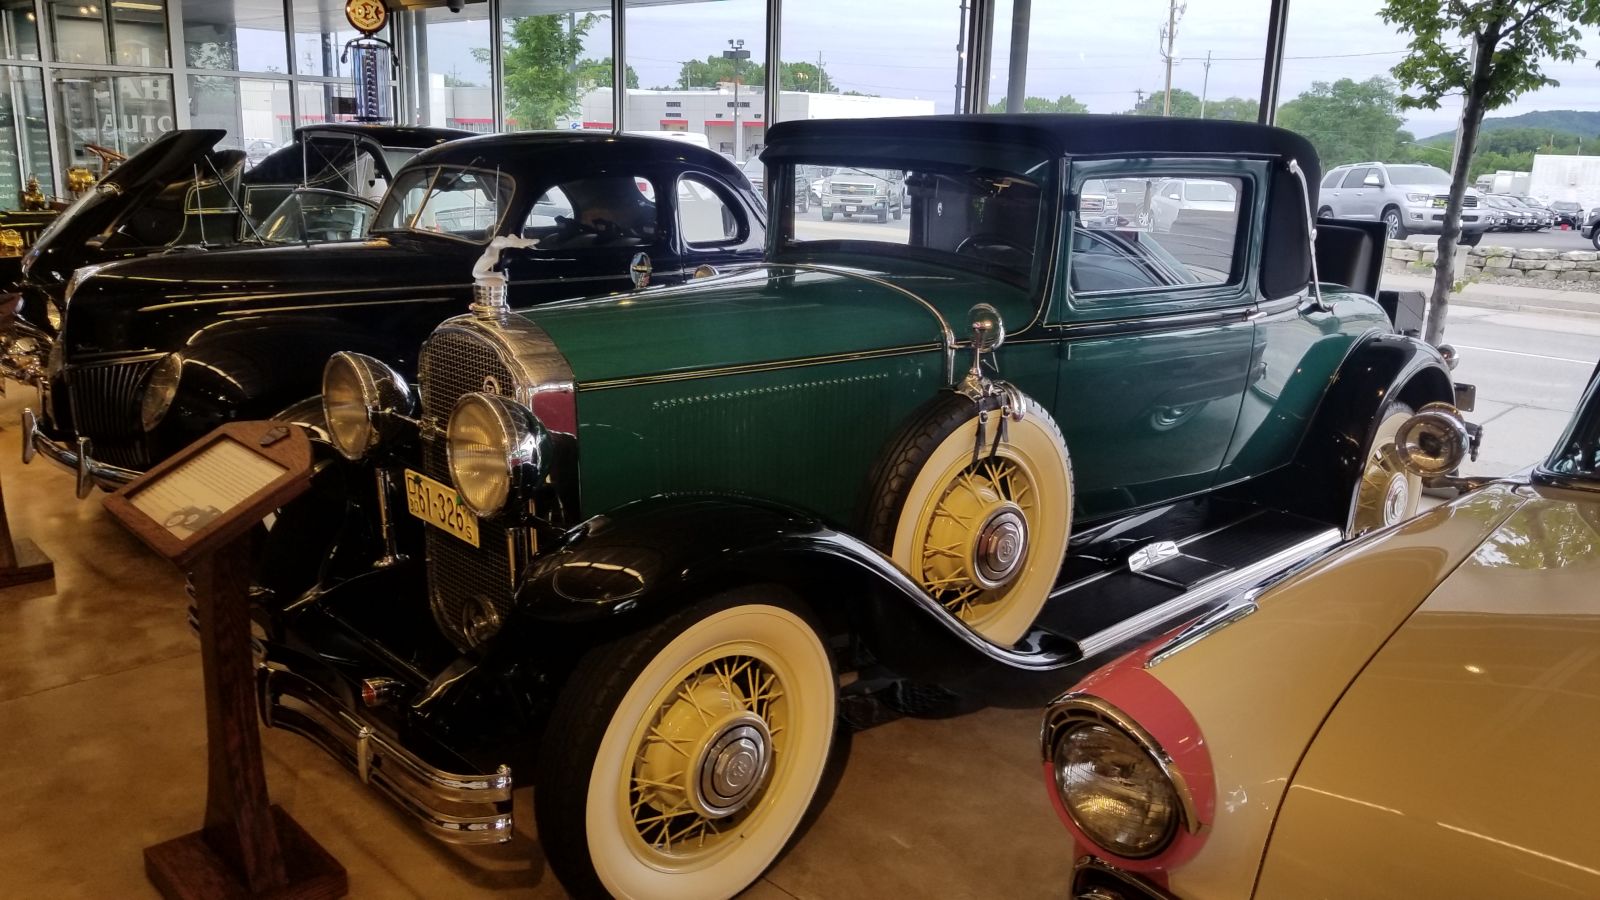 This Buick is a 1930 Buick Country Club Coupe Model 64-C. Only three of these are known to still exist out of 3000!